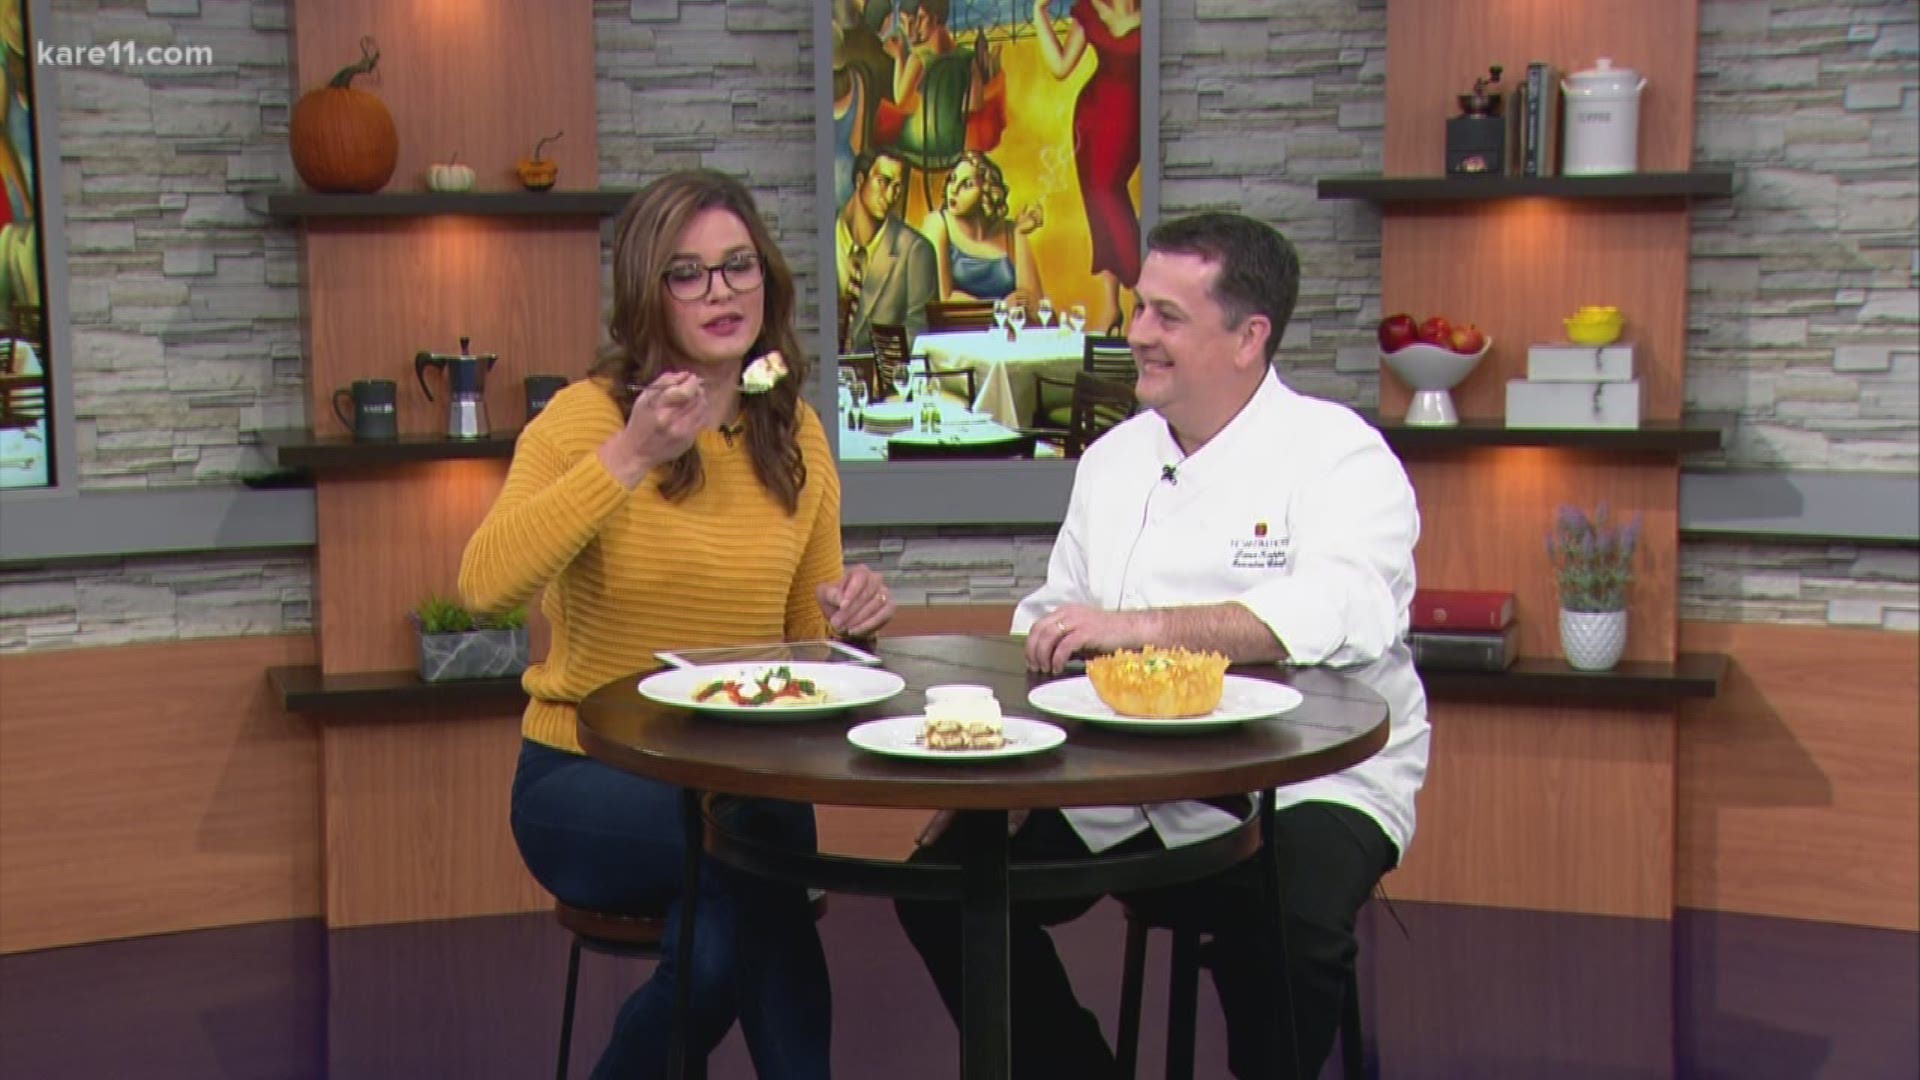 Pazzaluna is celebrating 20 years in business. To mark the occasion, select original menu items will be available at their original 1998 menu prices. Just for tonight, free tiramisu will be served to all diners. Chef Lance Kapps joined KARE 11 Saturday to